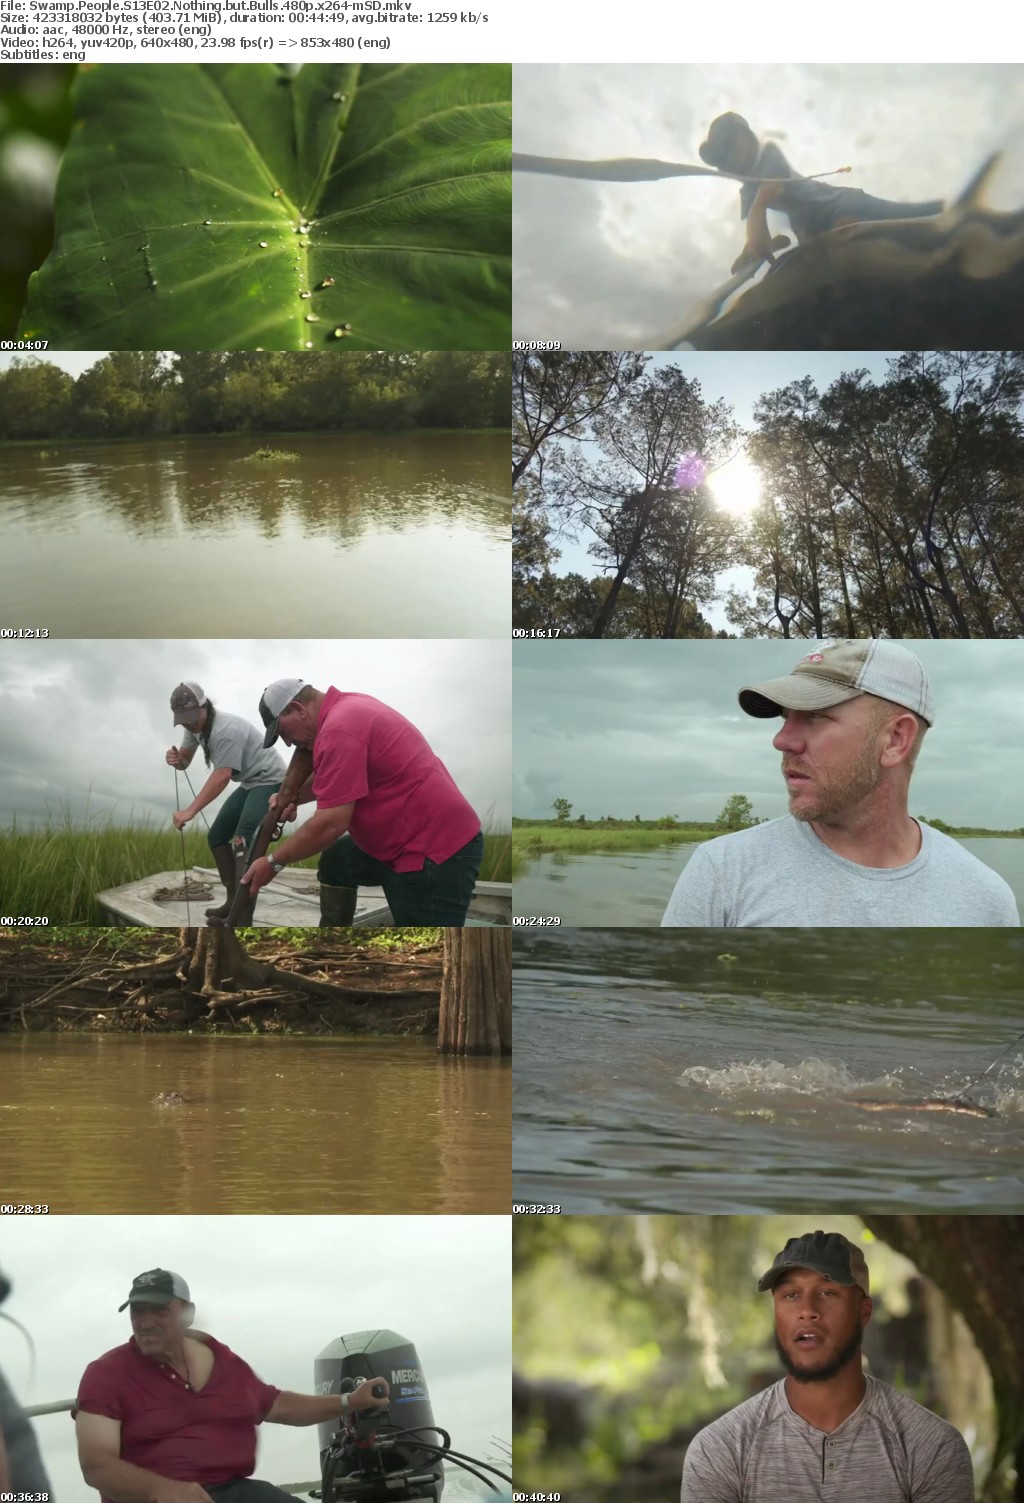 Swamp People S13E02 Nothing but Bulls 480p x264-mSD